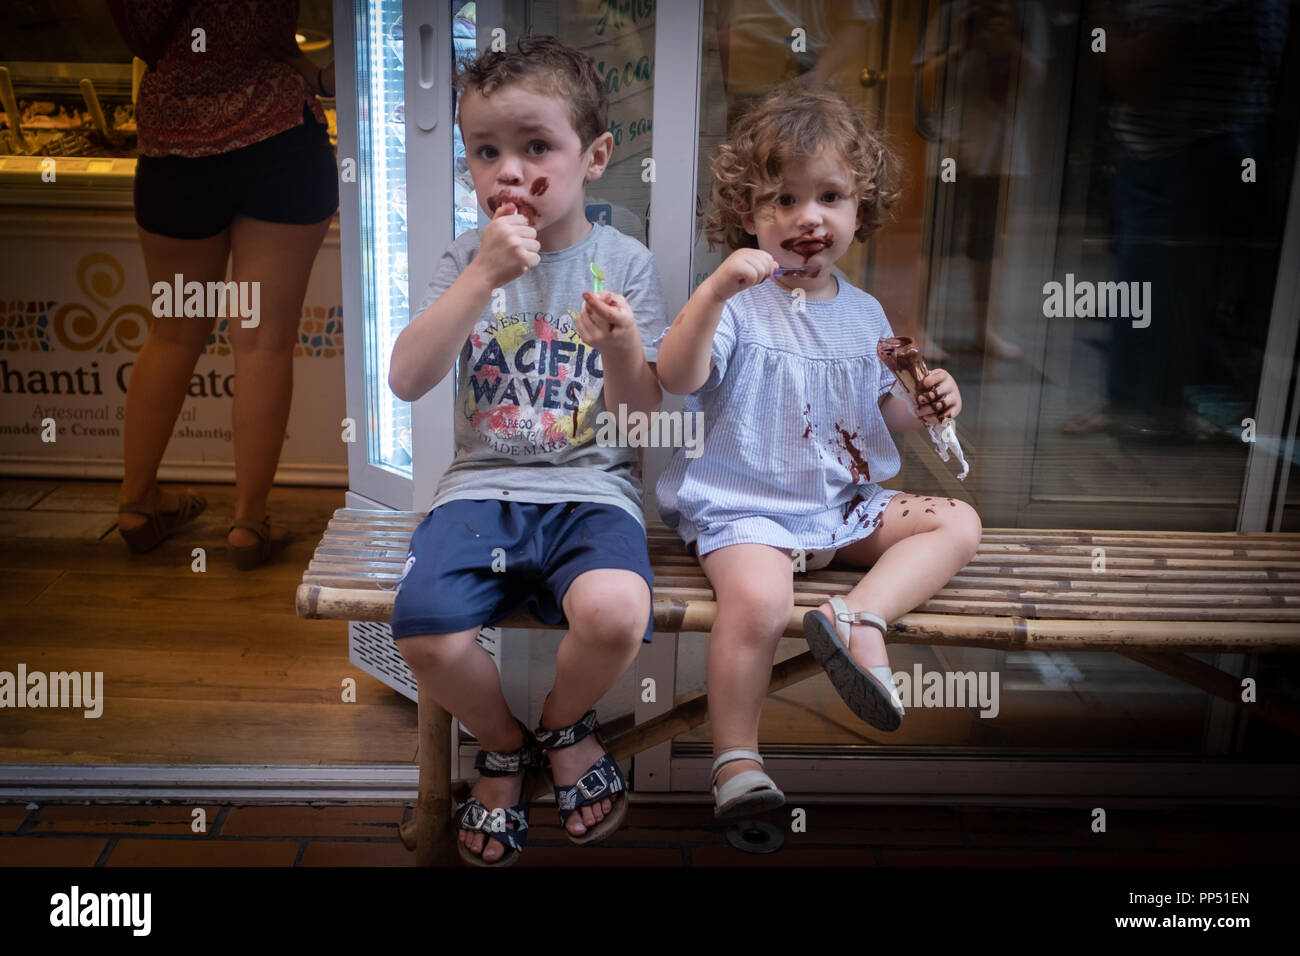 Barcelona, Spain. 22 September 22, 2018: Two children with get chocolate ice cream all over their faces and clothes while sitting in the street Credit: On Sight Photographic/Alamy Live News Stock Photo